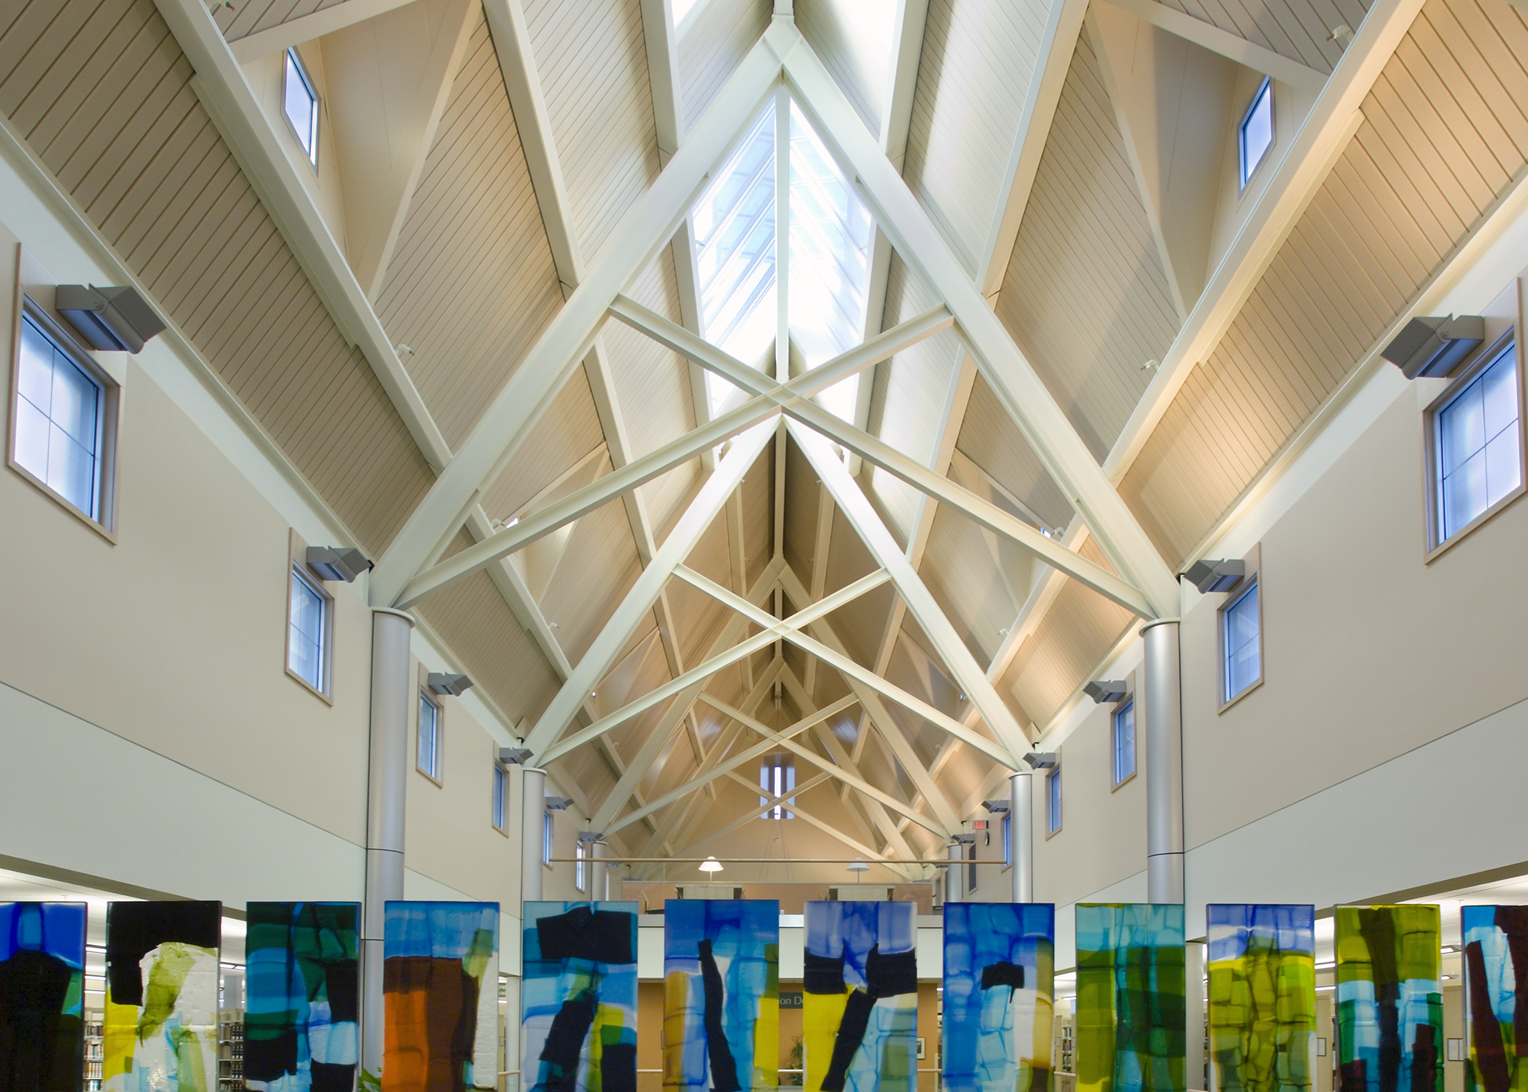 Pacific University Library. The foreground of this image shows the upper portion of a wall comprised of colorful fused glass panels. Both above and beyond the panels, a high, gabled ceiling with elegant white exposed support trusses enhances the grand cathedral-like space.